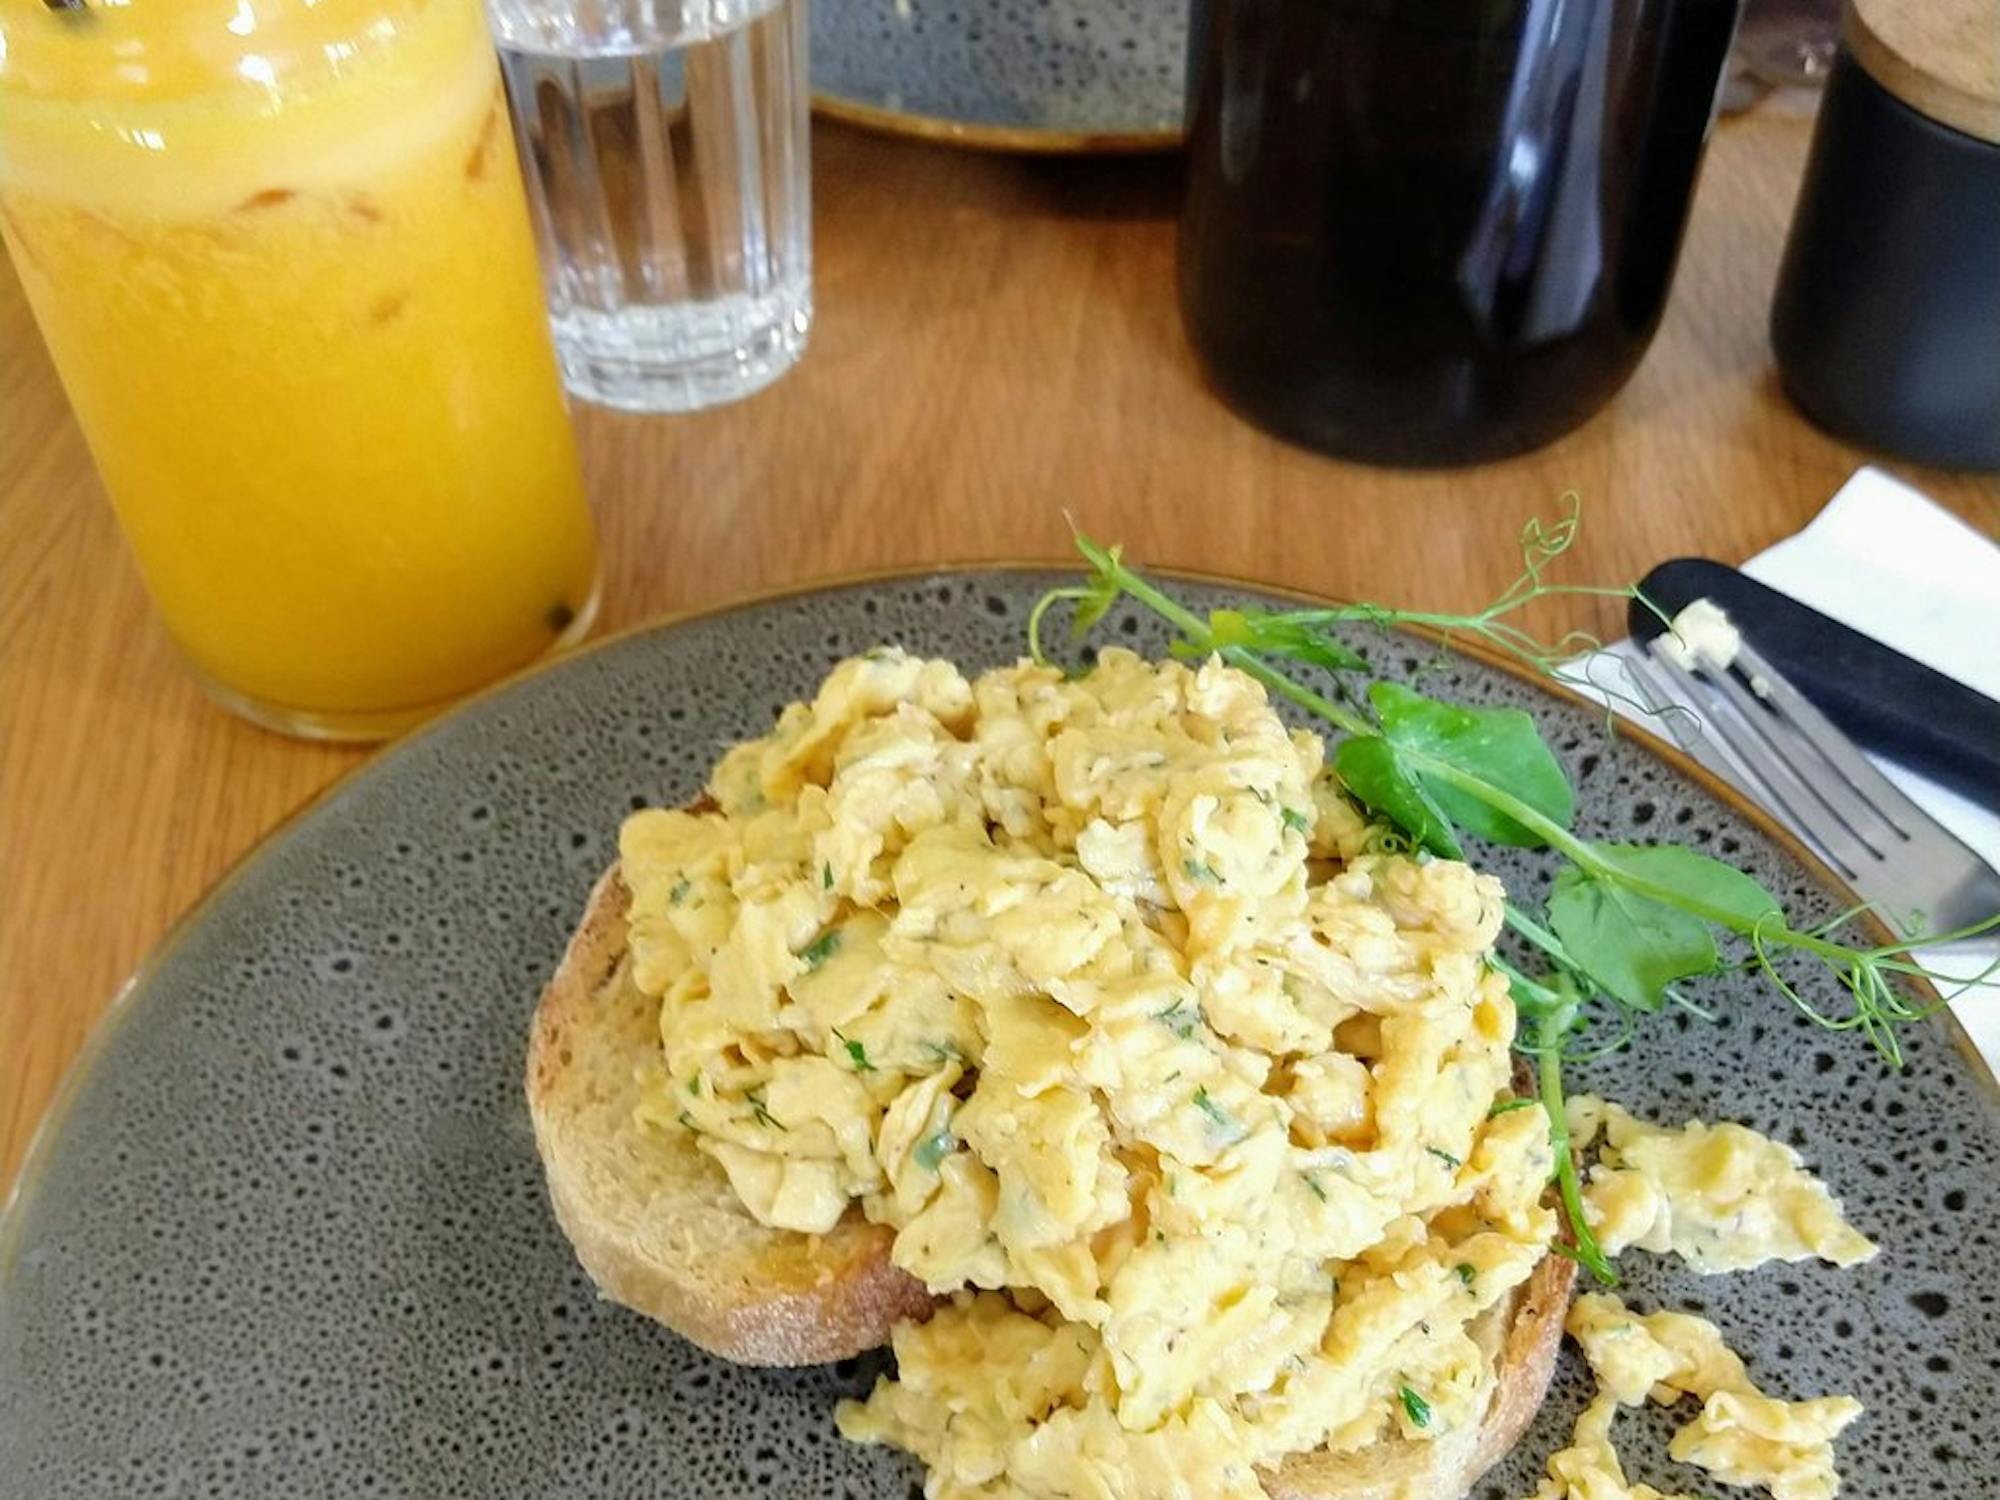 Scrambled eggs on a slice of toasted sourdough with orange juice in the background